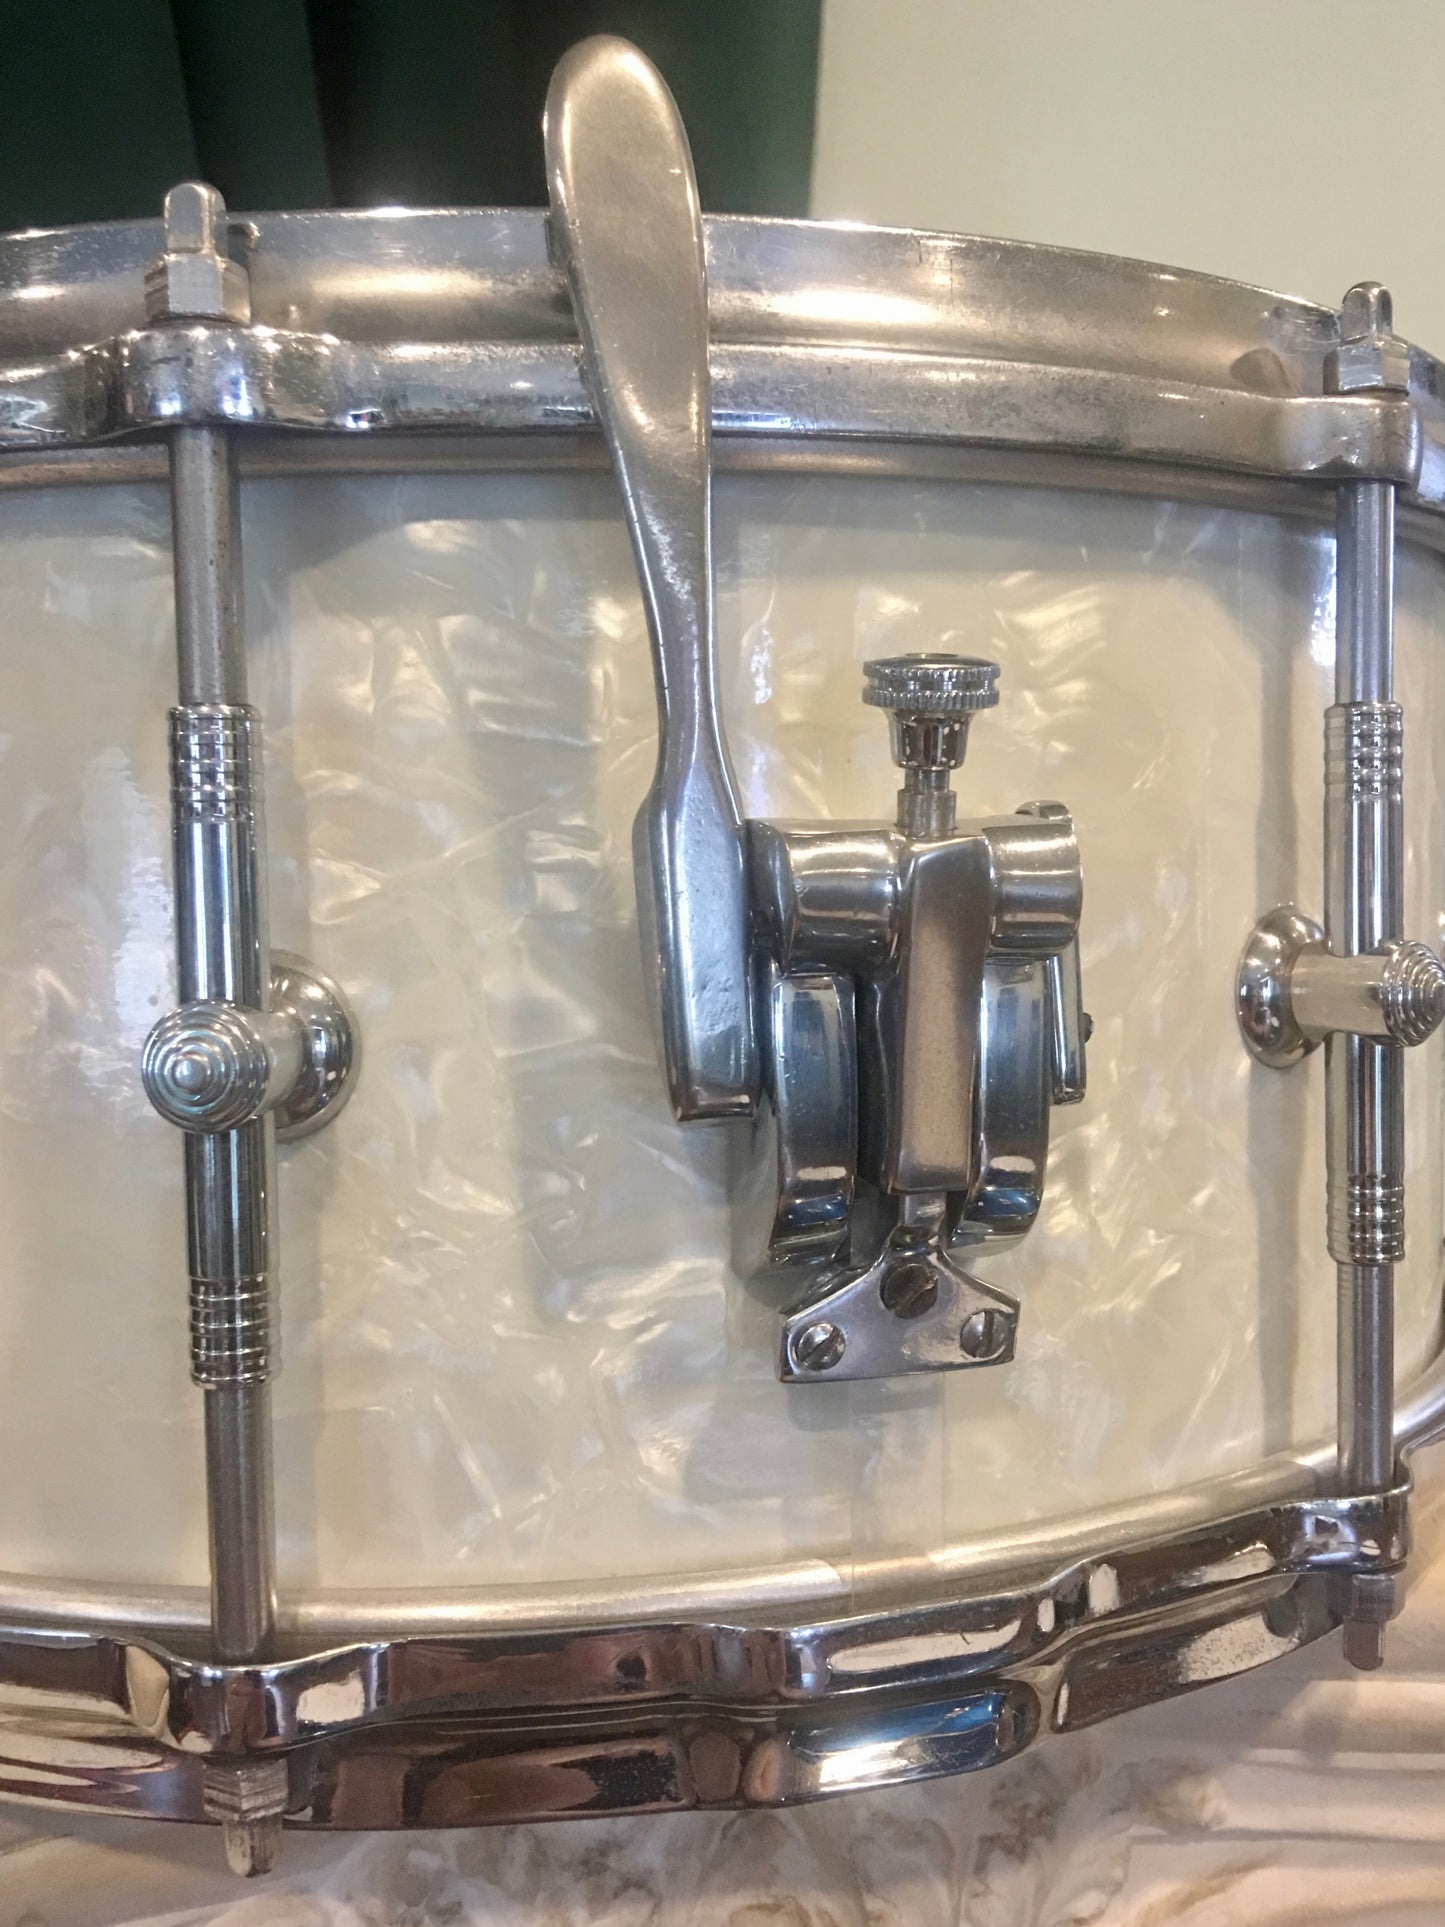 1954 Gretsch BroadKaster "Name Band" White Marine Pearl Drum Set w/ 6.5x14 Gladstone Snare Drum *Time Capsule*